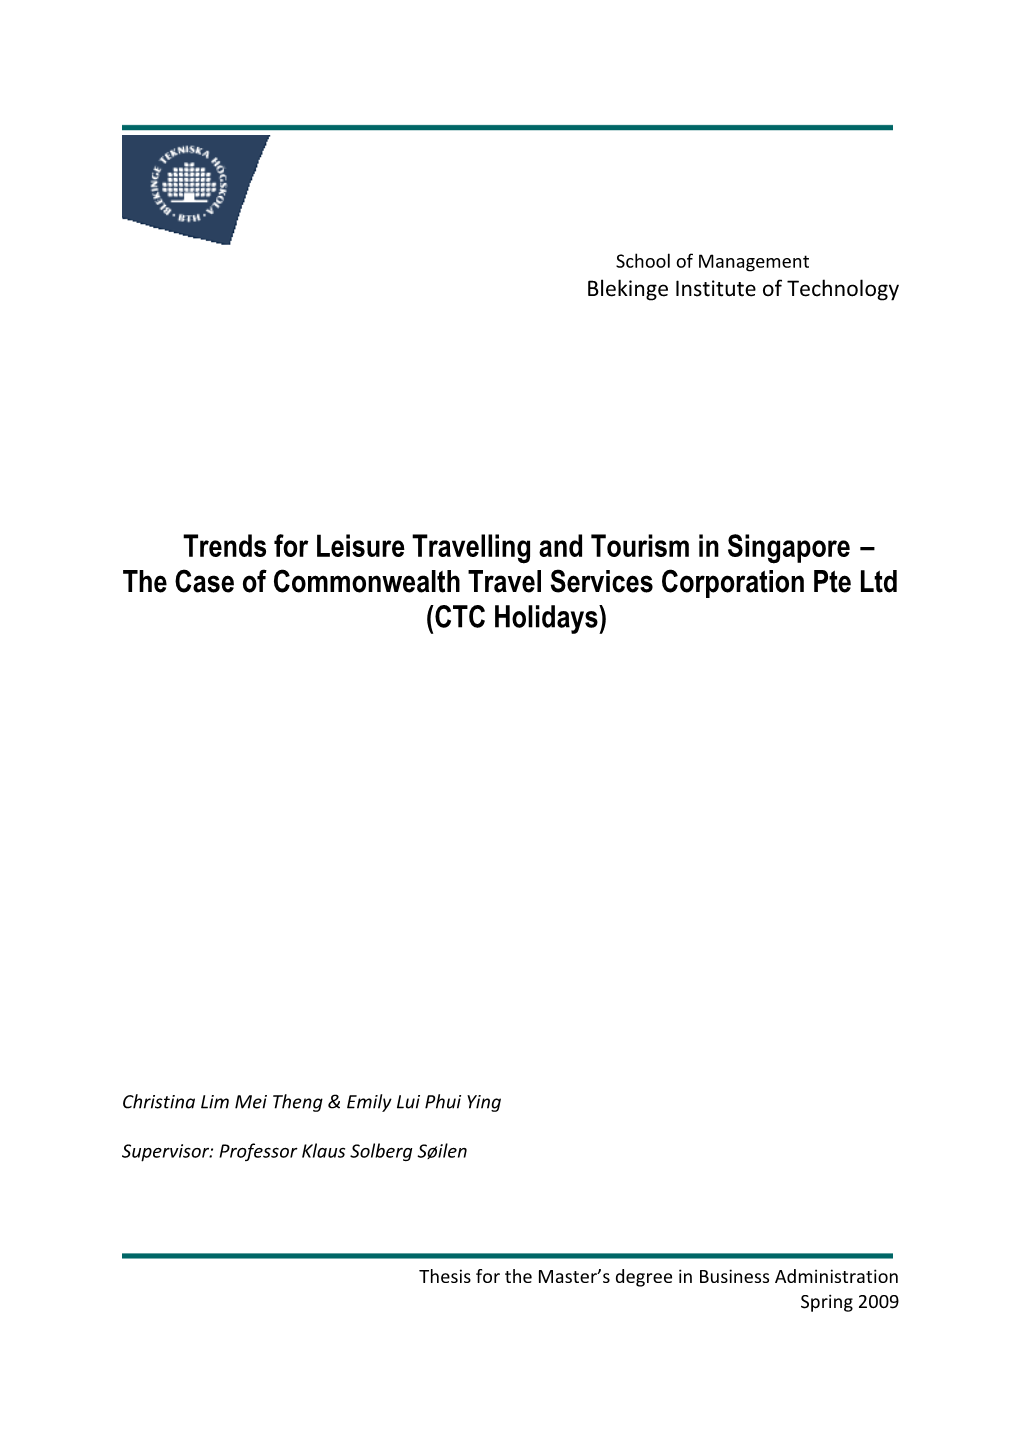 Trends for Leisure Travelling and Tourism in Singapore – the Case of Commonwealth Travel Services Corporation Pte Ltd (CTC Holidays)